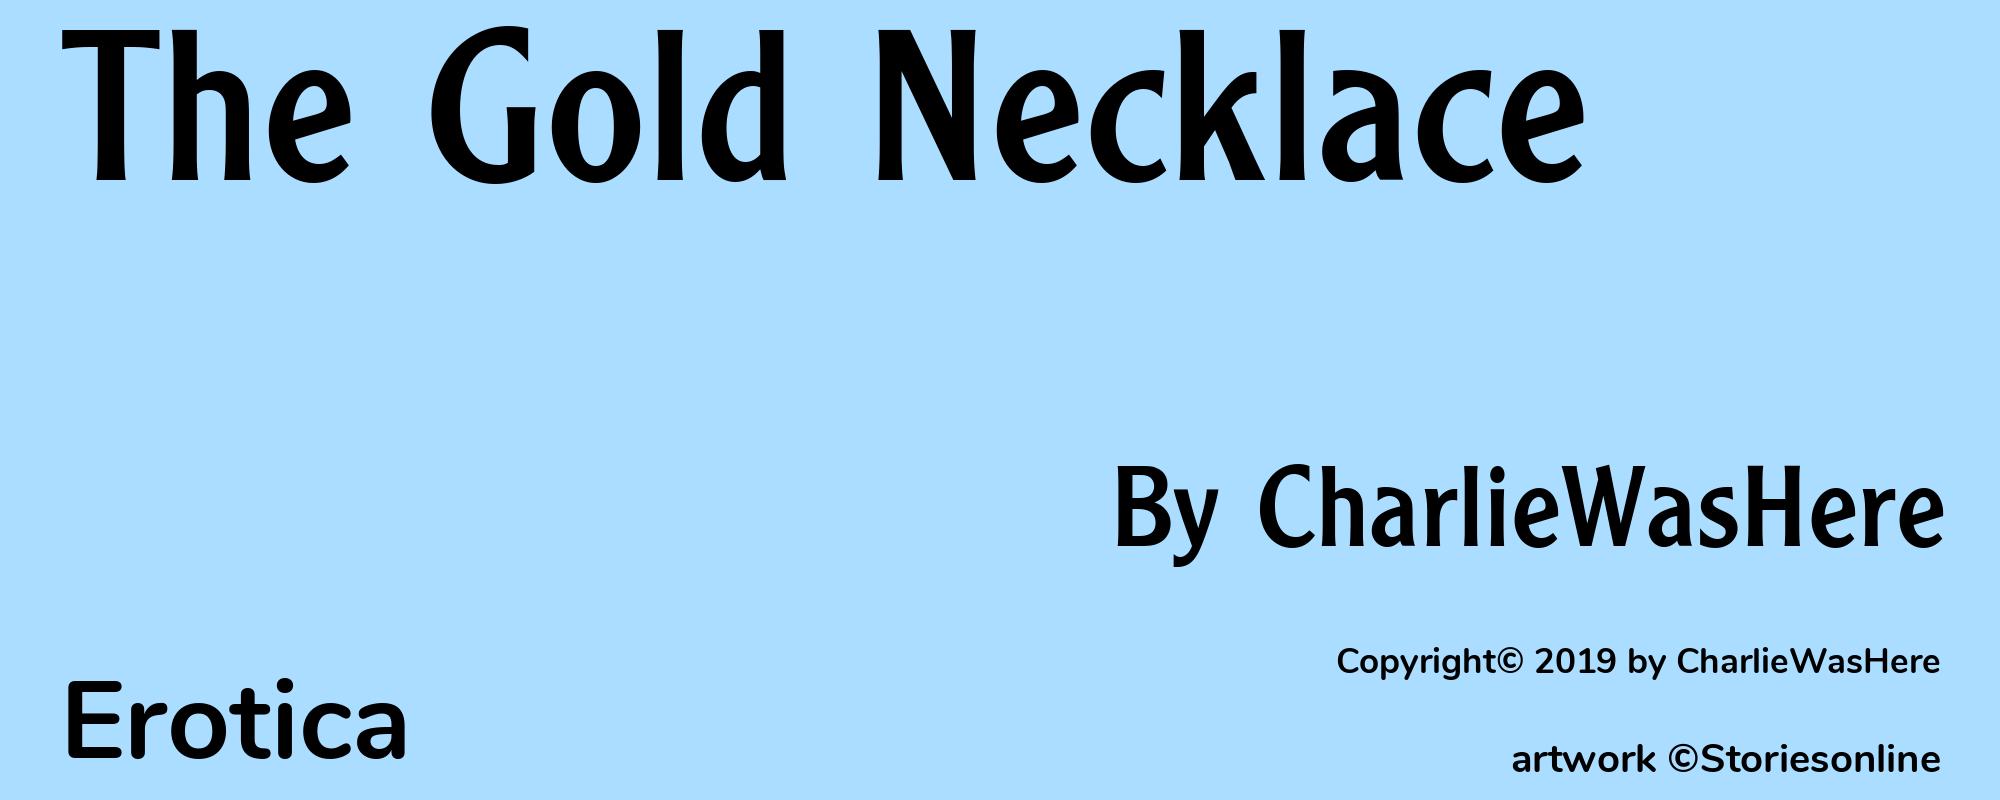 The Gold Necklace - Cover